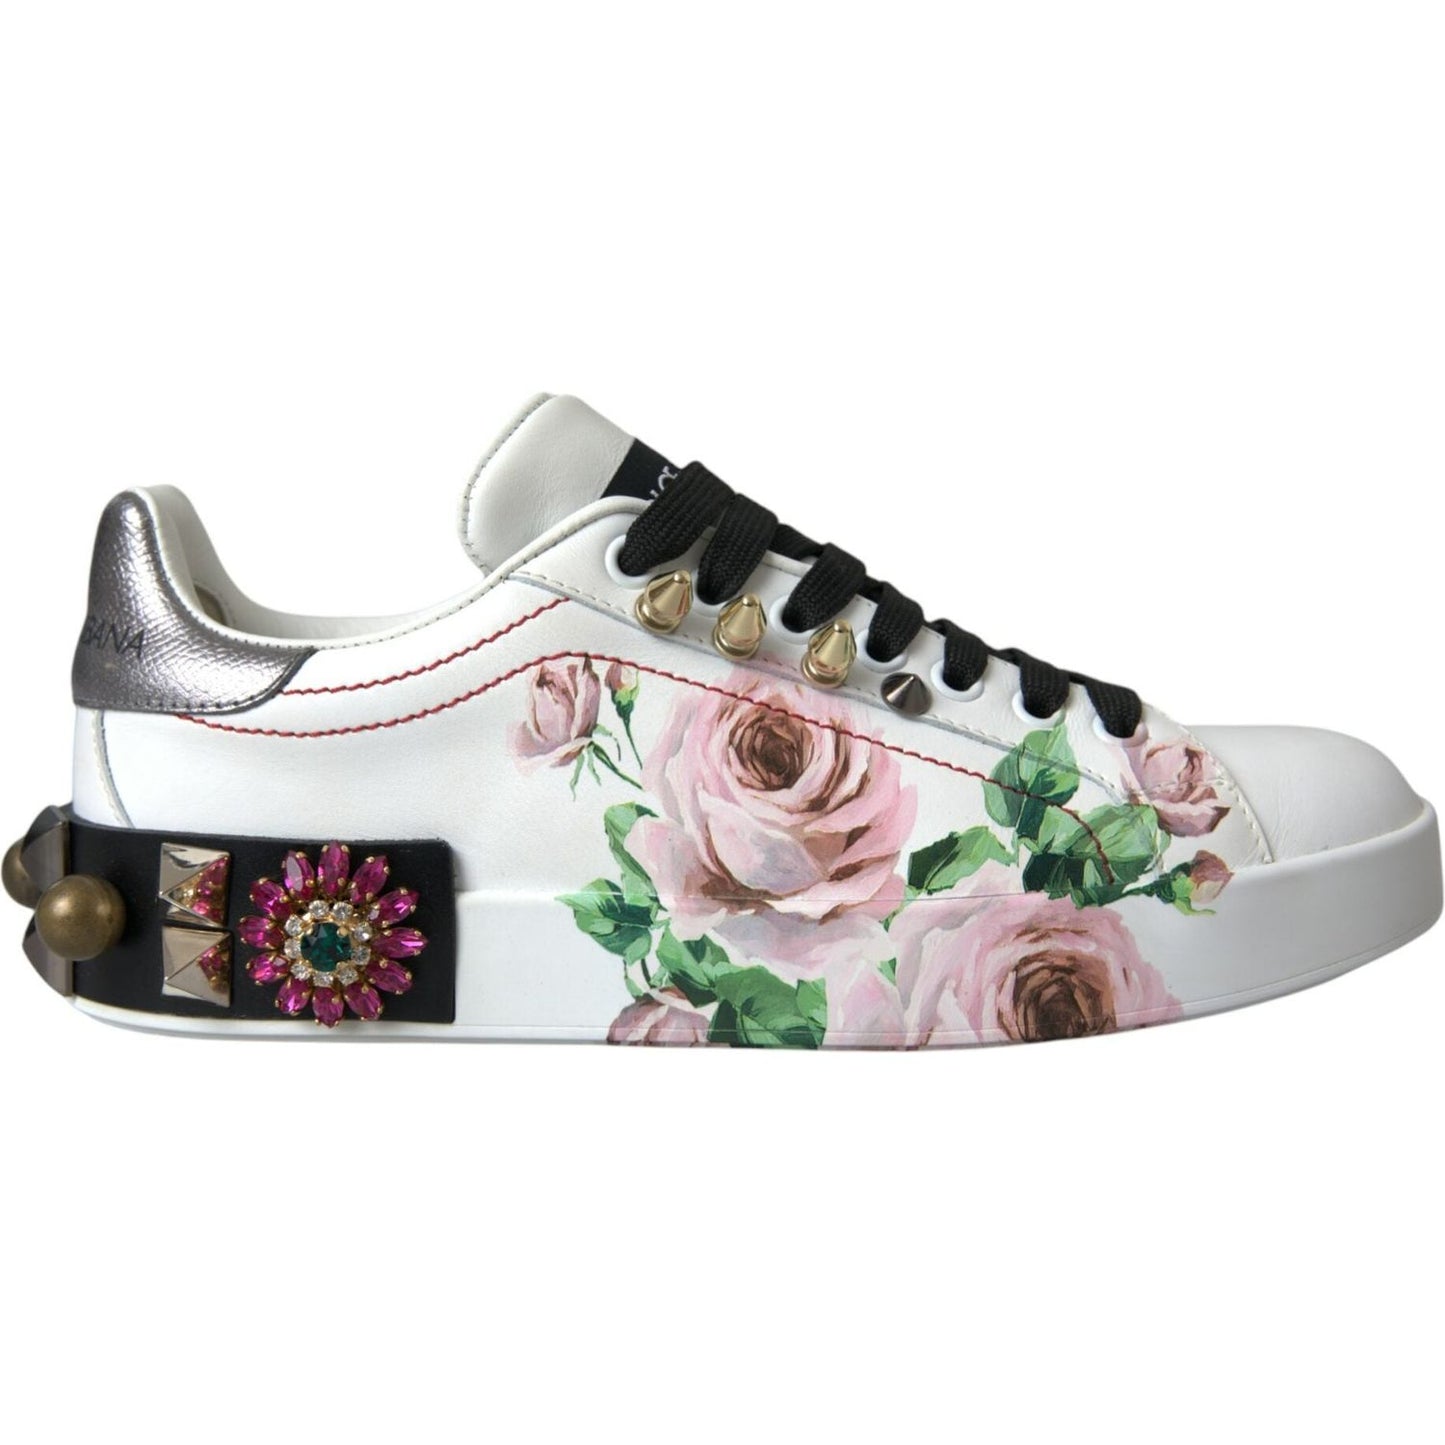 Dolce & Gabbana White Leather Crystal Roses Floral Sneakers Shoes white-leather-crystal-roses-floral-sneakers-shoes-1